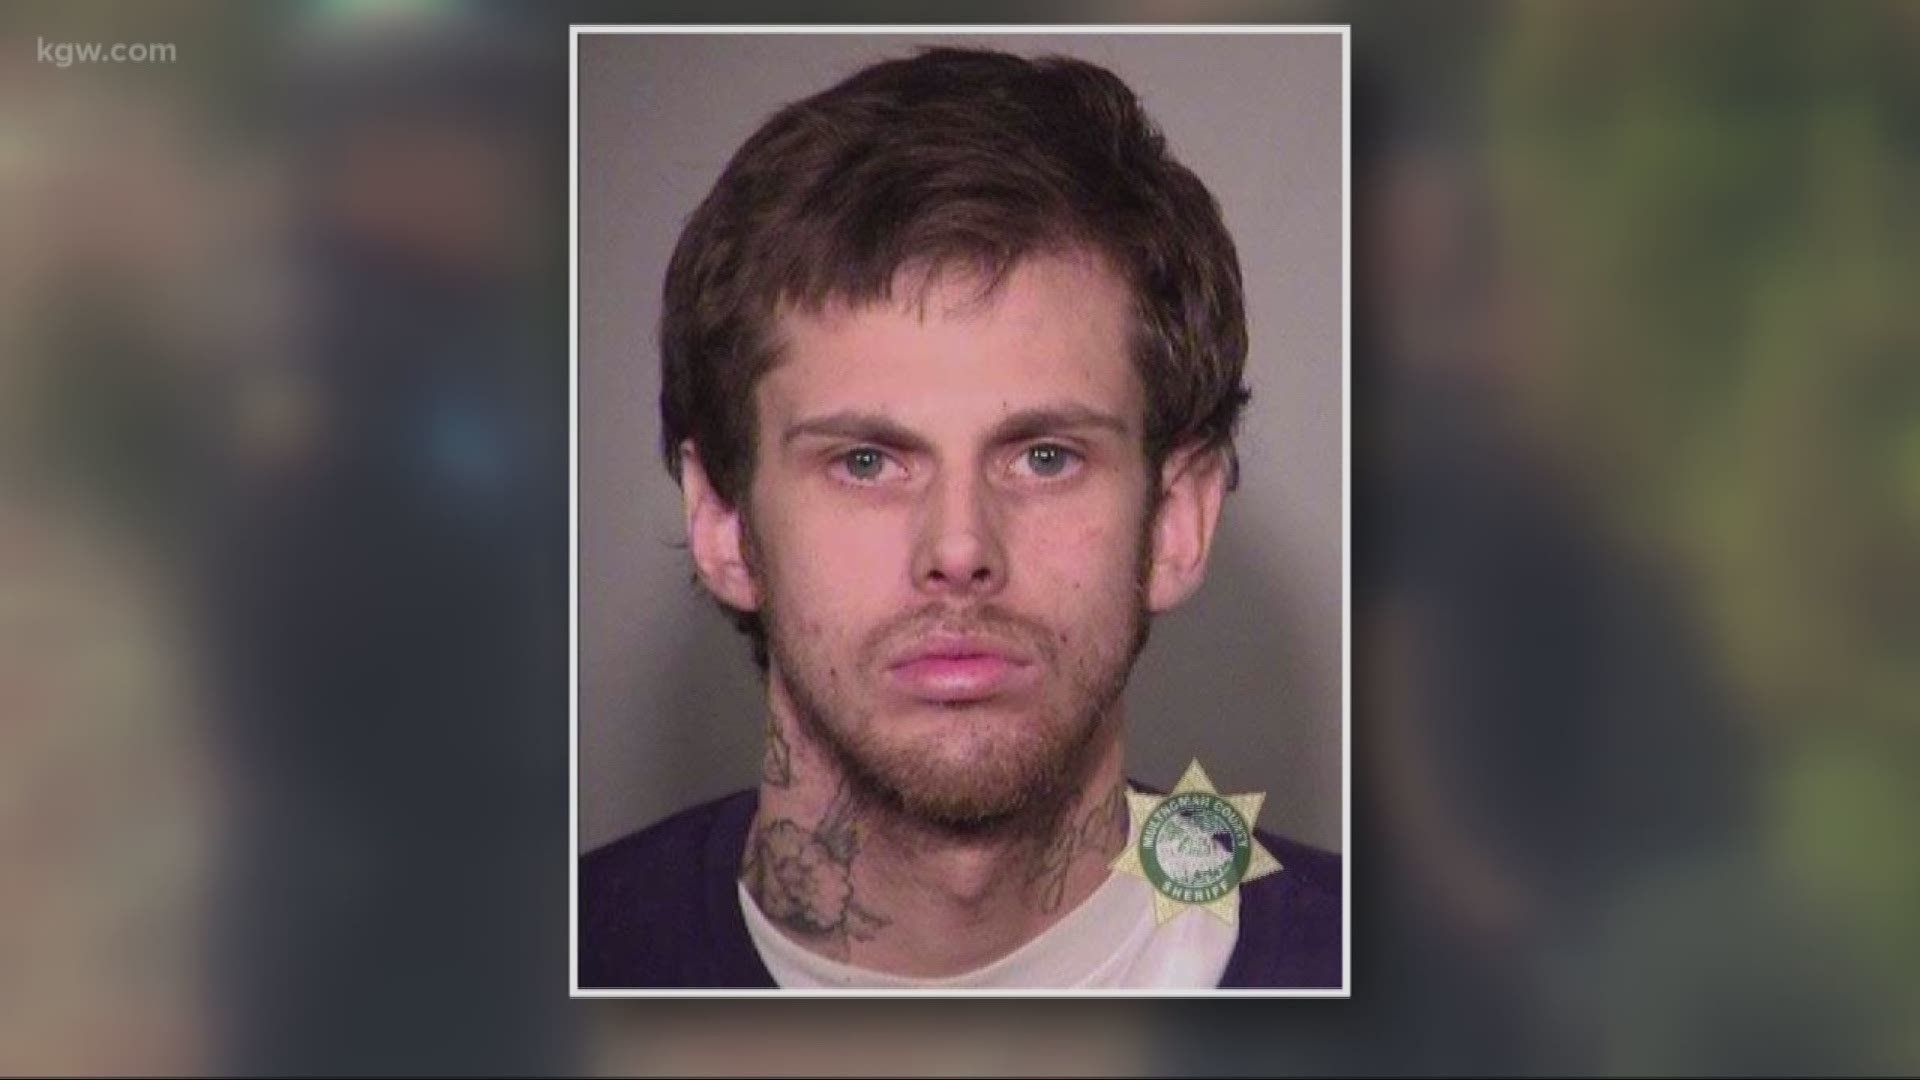 Authorities are looking for a Multnomah County Jail inmate who they said stole a truck and drove away from his work crew in Portland.